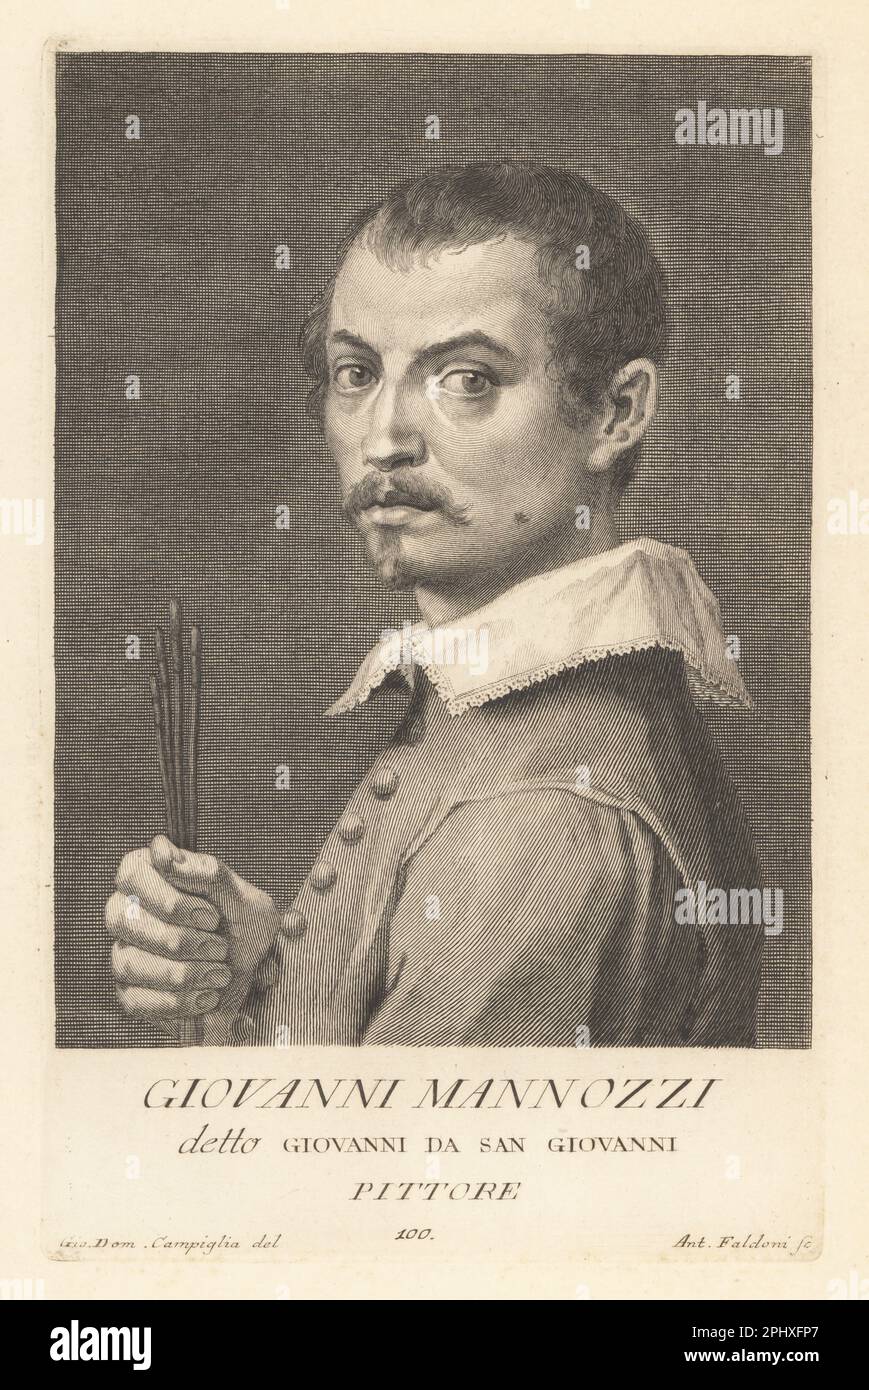 Giovanni da San Giovanni, also known as Giovanni Mannozzi, Italian painter of the early Baroque period, active in Florence, 1592-1636. Depicted holding paint brushes. Copperplate engraving by Giovanni Antonio Faldoni after Giovanni Domenico Campiglia after a self portrait by the artist from Francesco Moucke's Museo Florentino (Museum Florentinum), Serie di Ritratti de Pittori (Series of Portraits of Painters) stamperia Mouckiana, Florence, 1752-62. Stock Photo